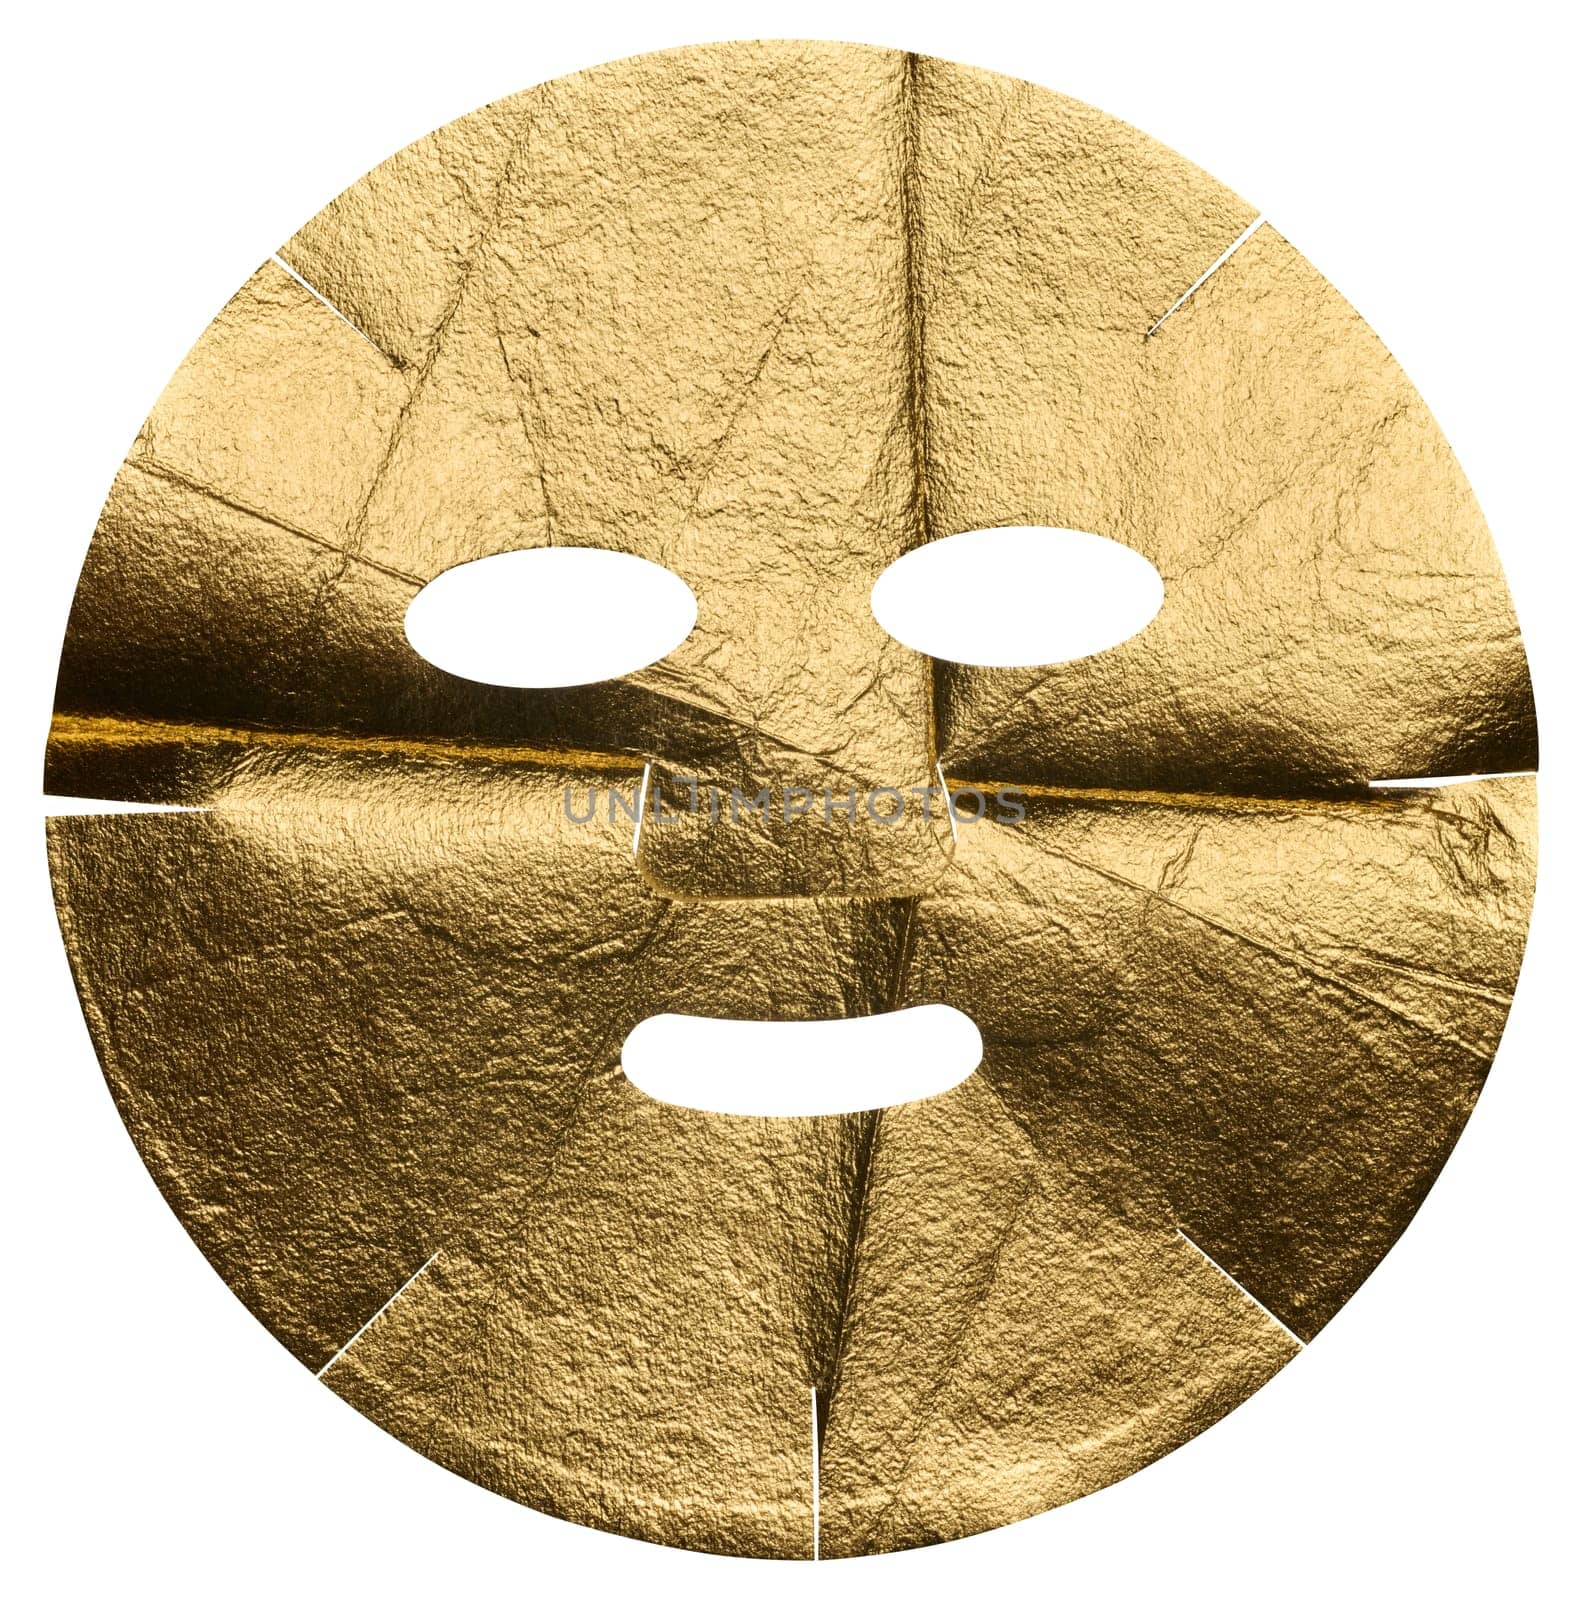 Fabric golden cosmetic face mask with cut holes on isolated background